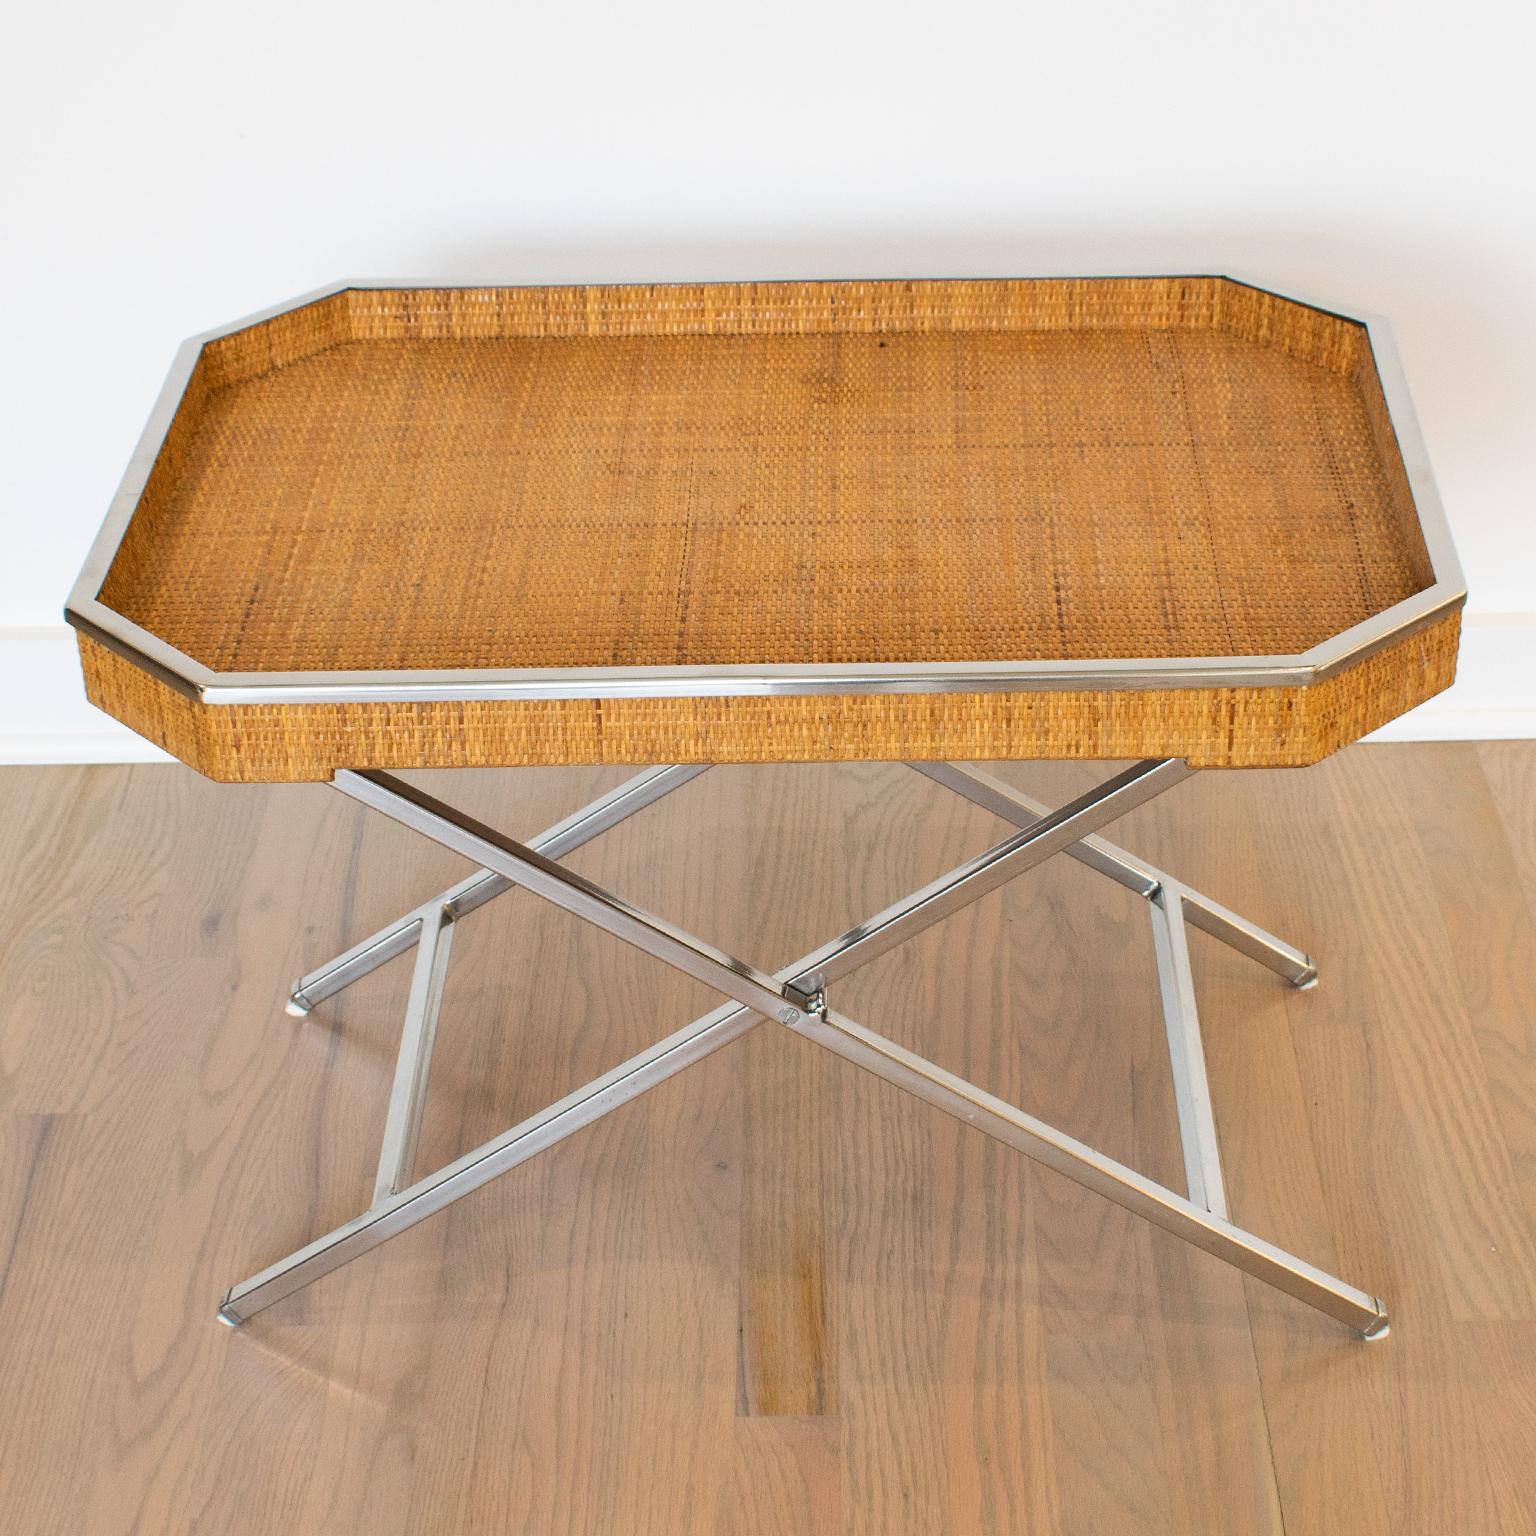 Tommaso Barbi designed this elegant large barware folding tray table in Italy in the 1970s. The rectangular butler shape boasts a chromed metal raised gallery and genuine rattan cane-work or wicker. The table has a chrome metal folding X-stand. The